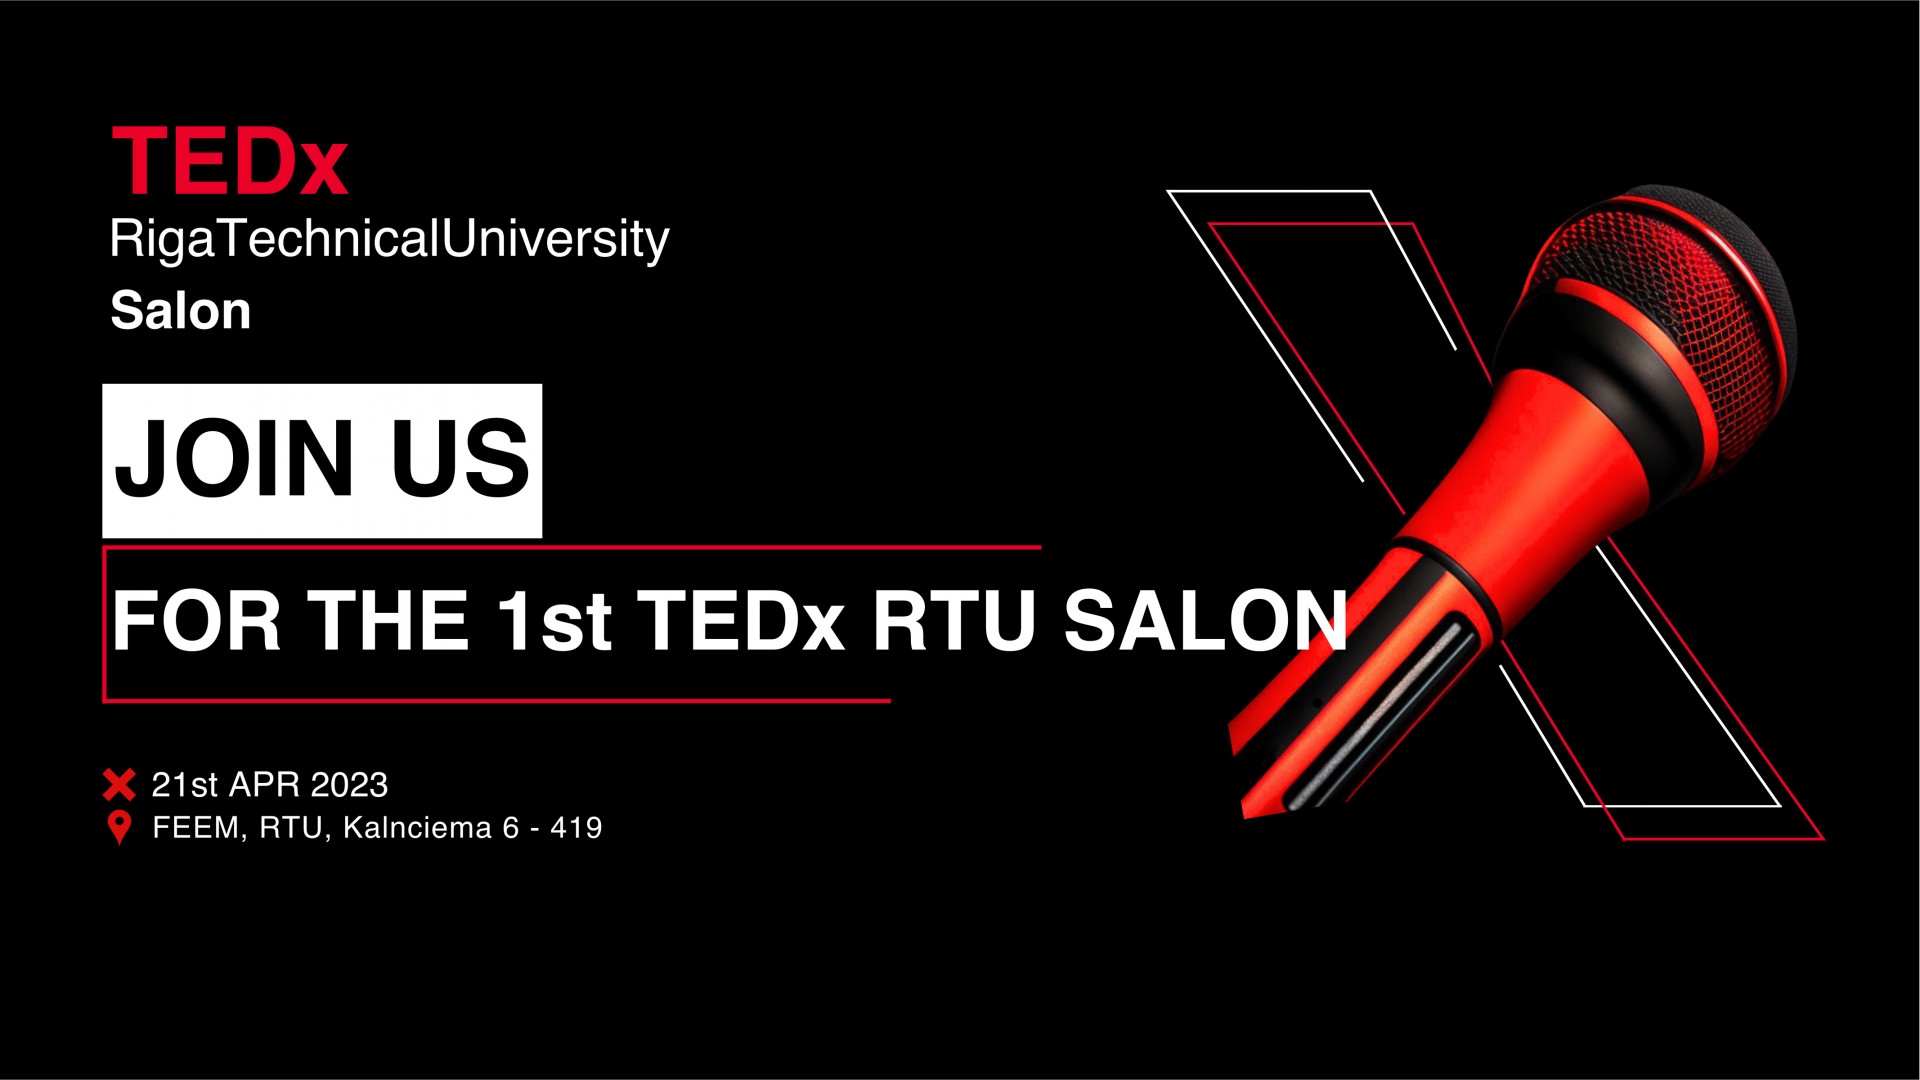 The first TEDxRigaTechnicalUniversity Salon event will take place on April 21